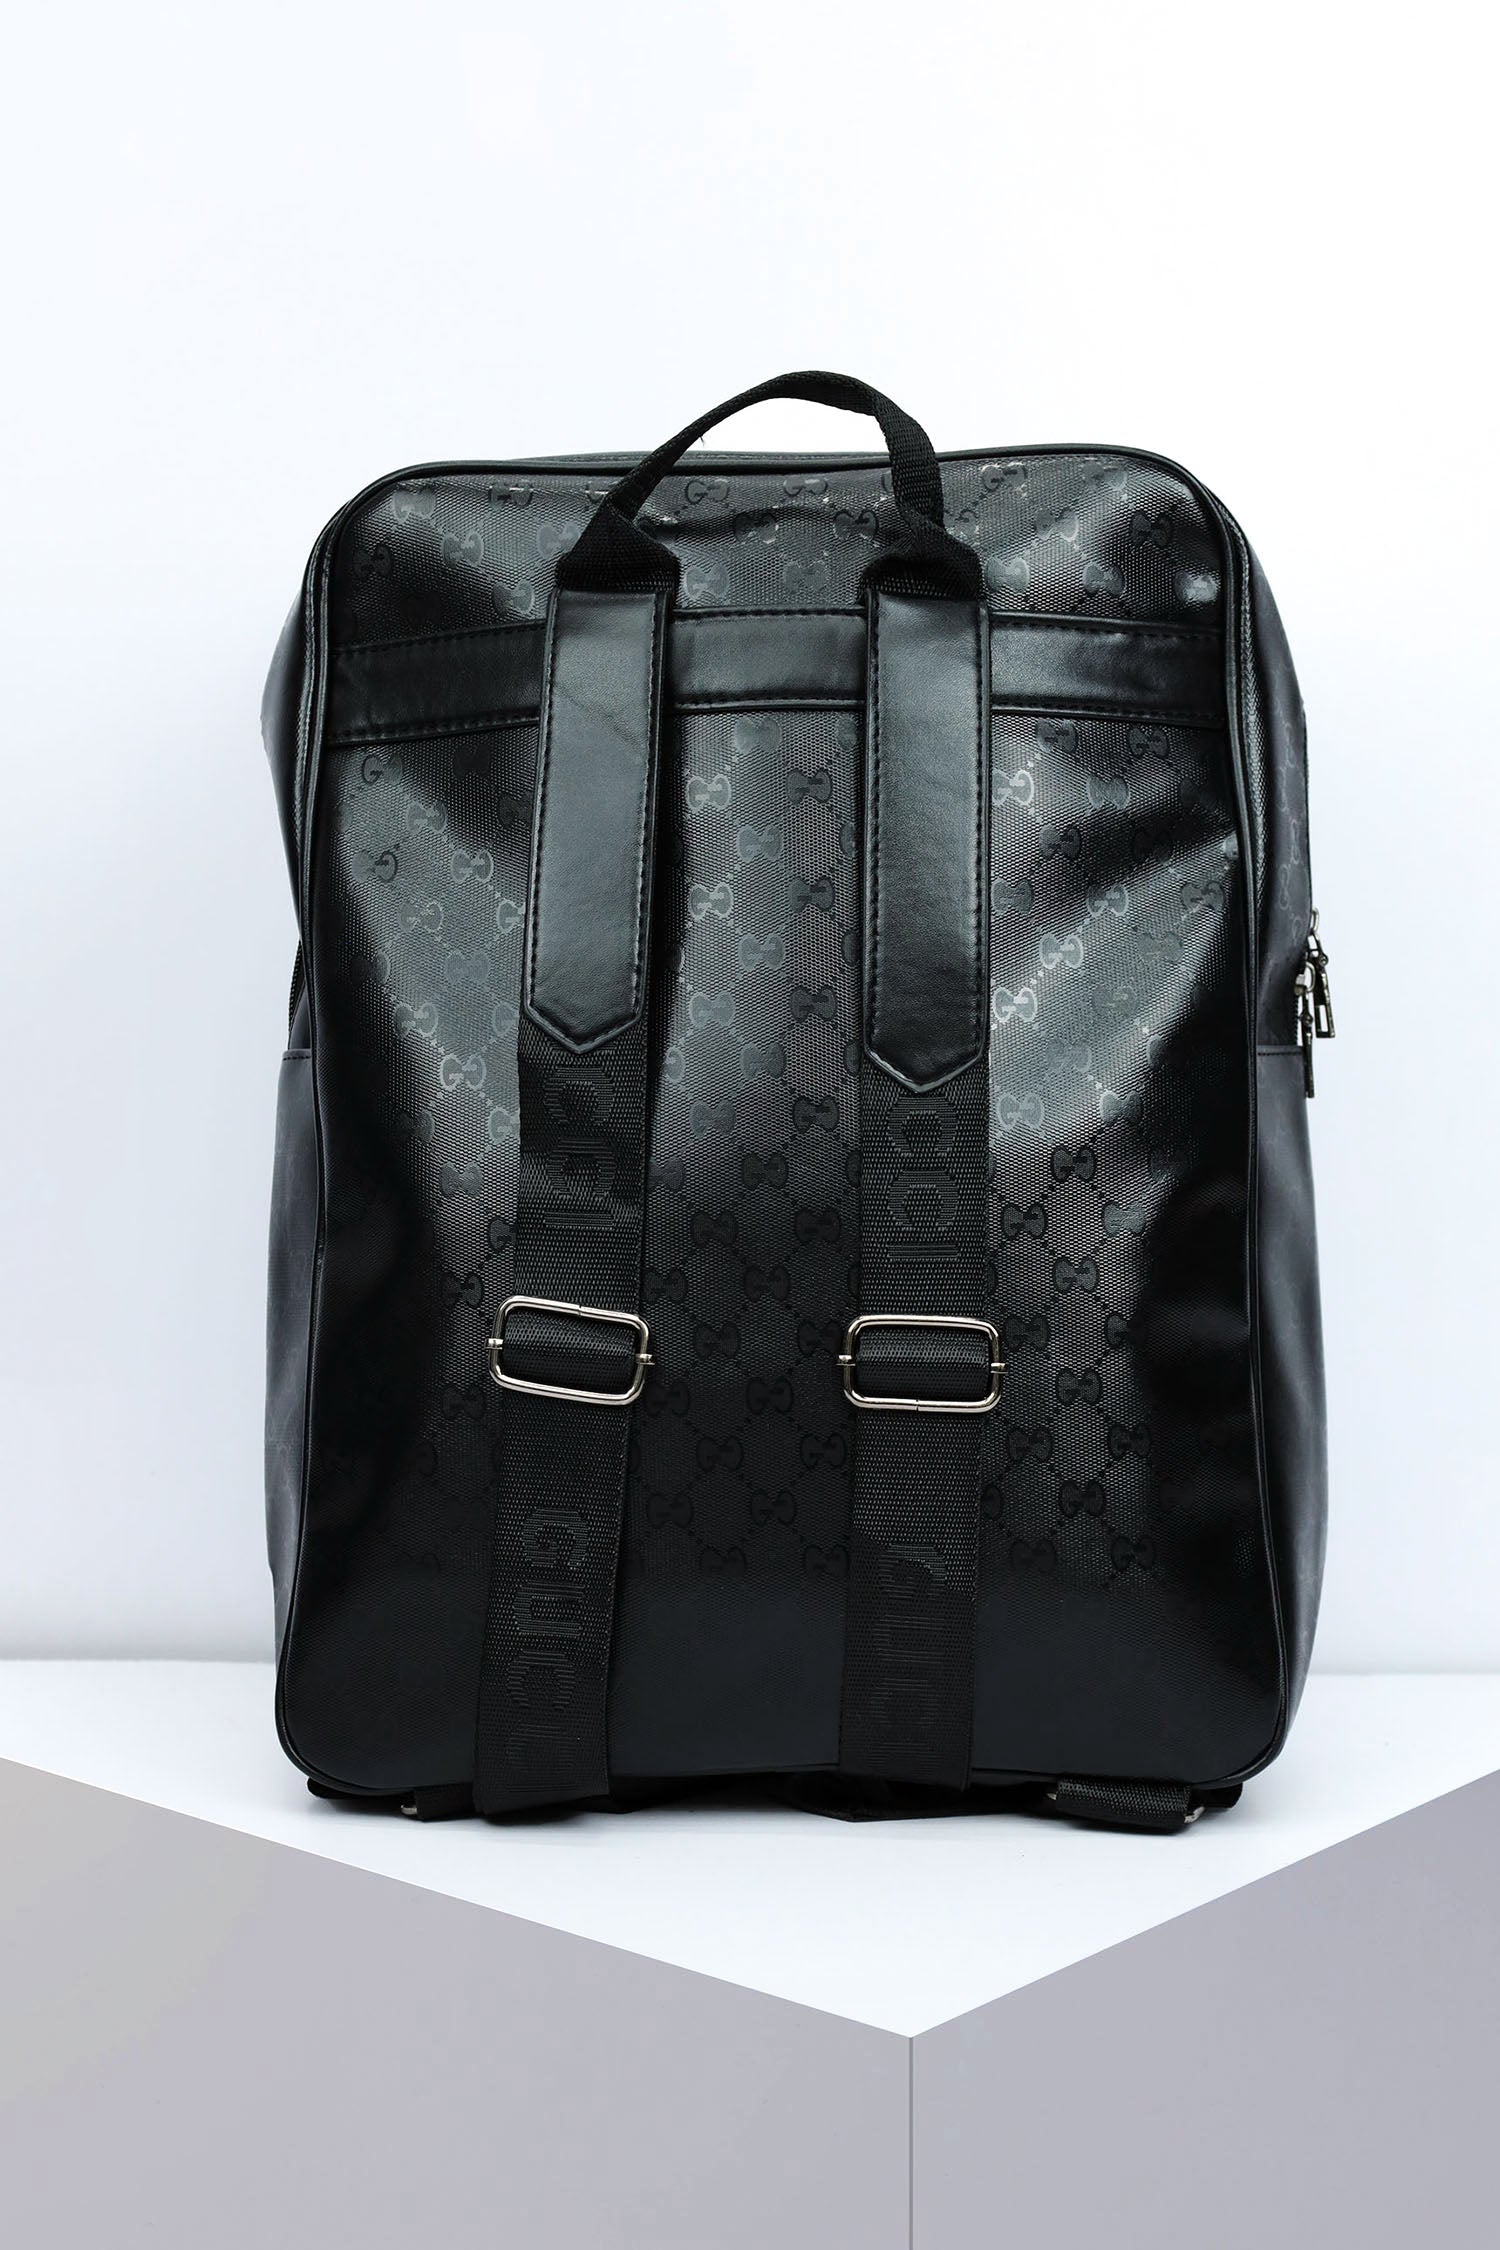 Guci Textured PU Leather Backpack in Black